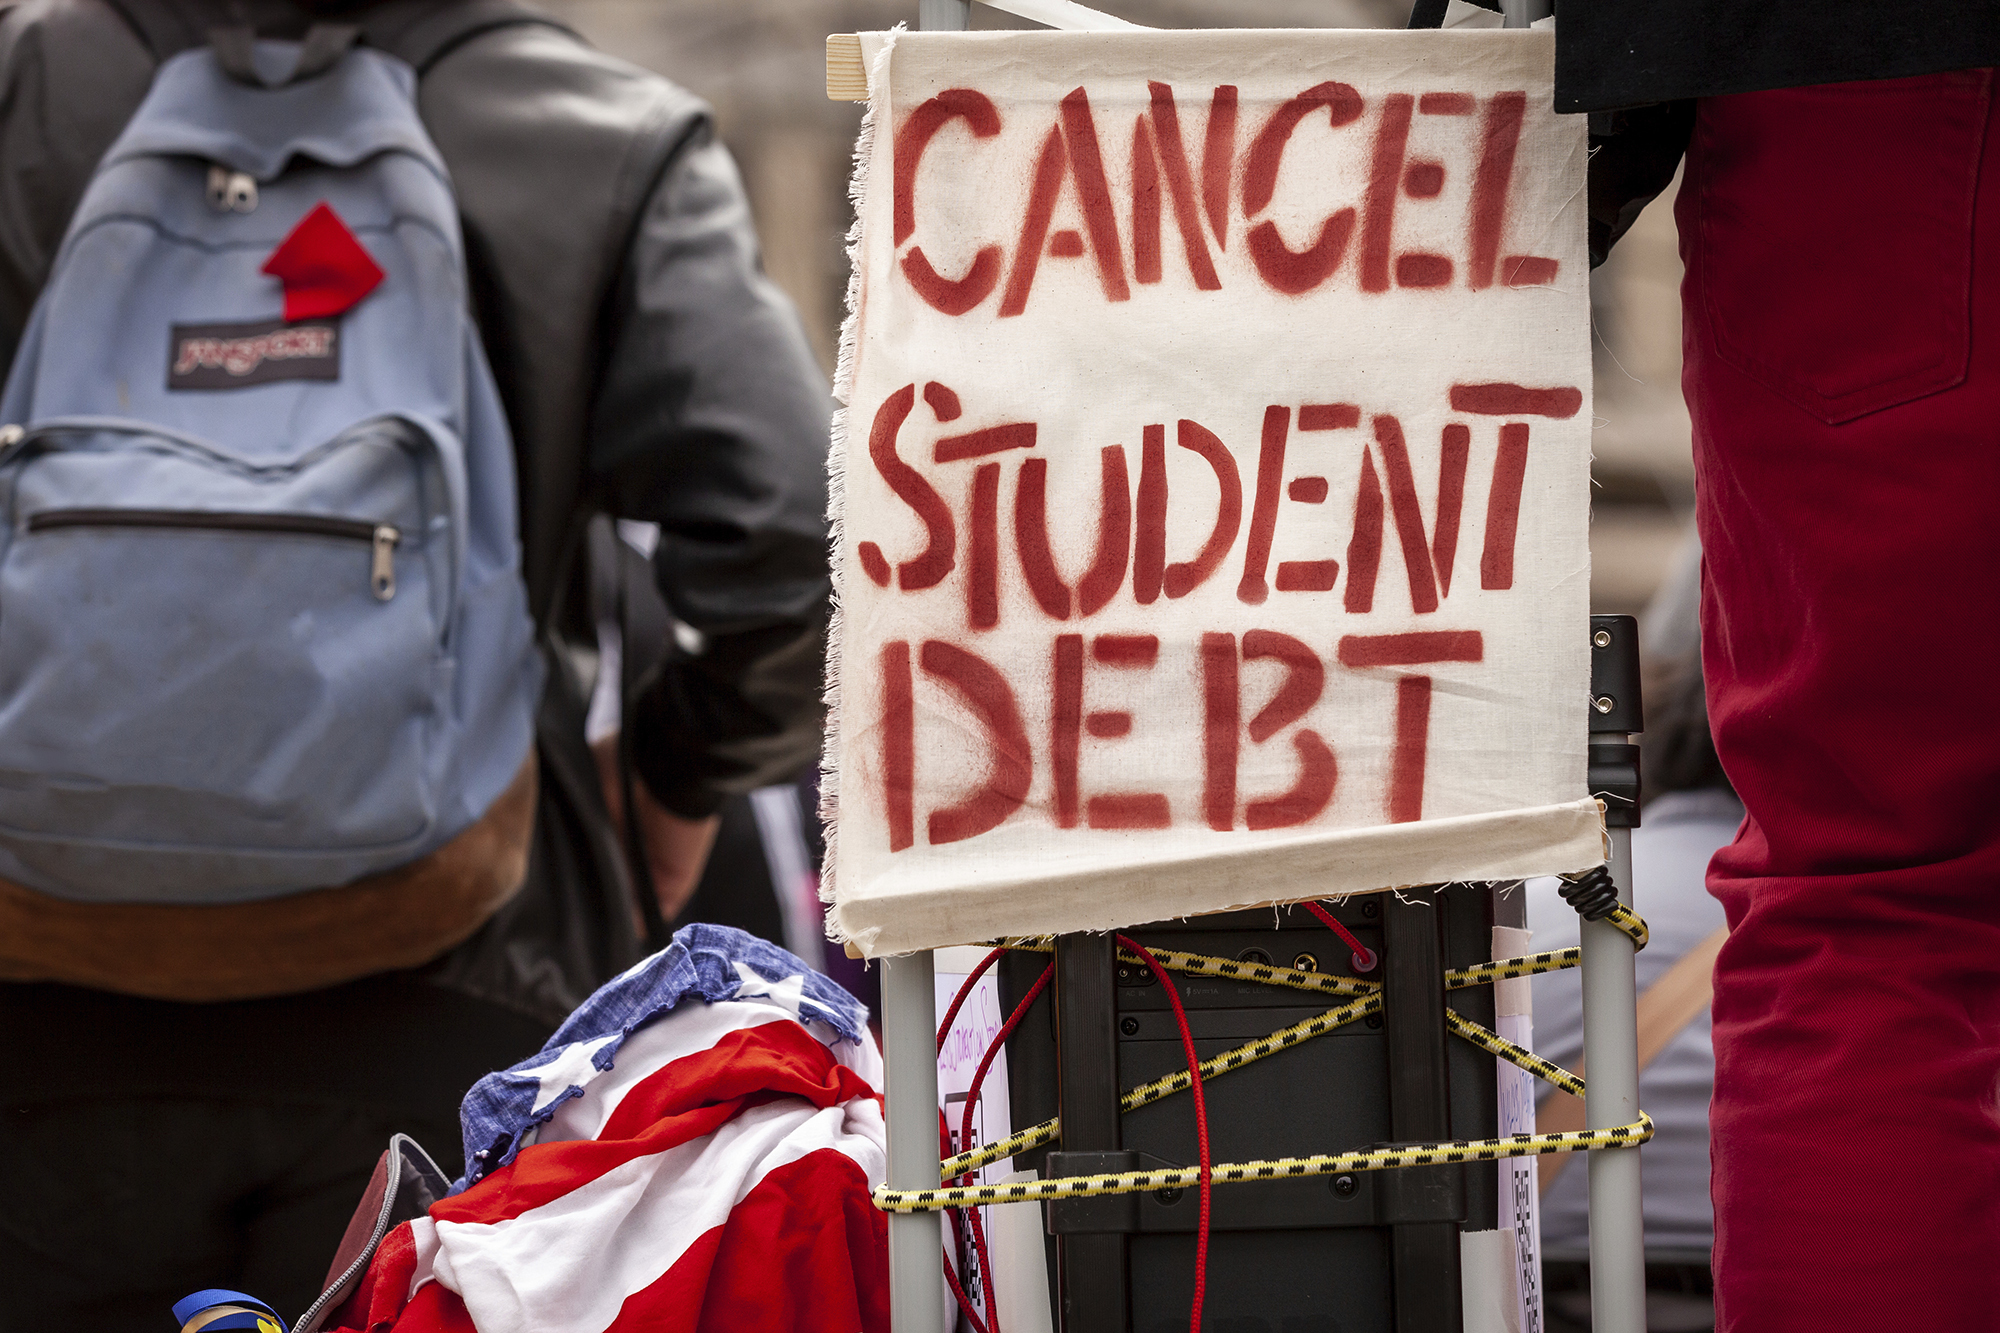 A sign calls for the cancellation of student debt at a rally.